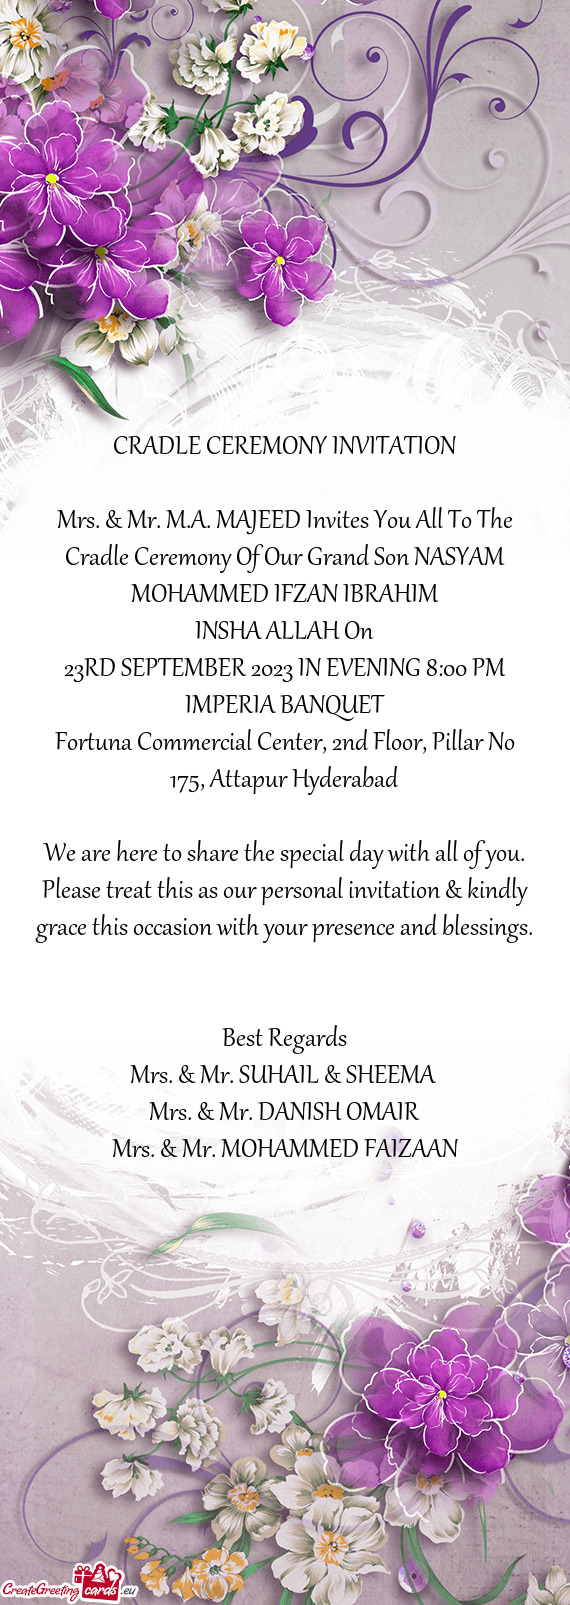 Mrs. & Mr. M.A. MAJEED Invites You All To The Cradle Ceremony Of Our Grand Son NASYAM MOHAMMED IFZAN